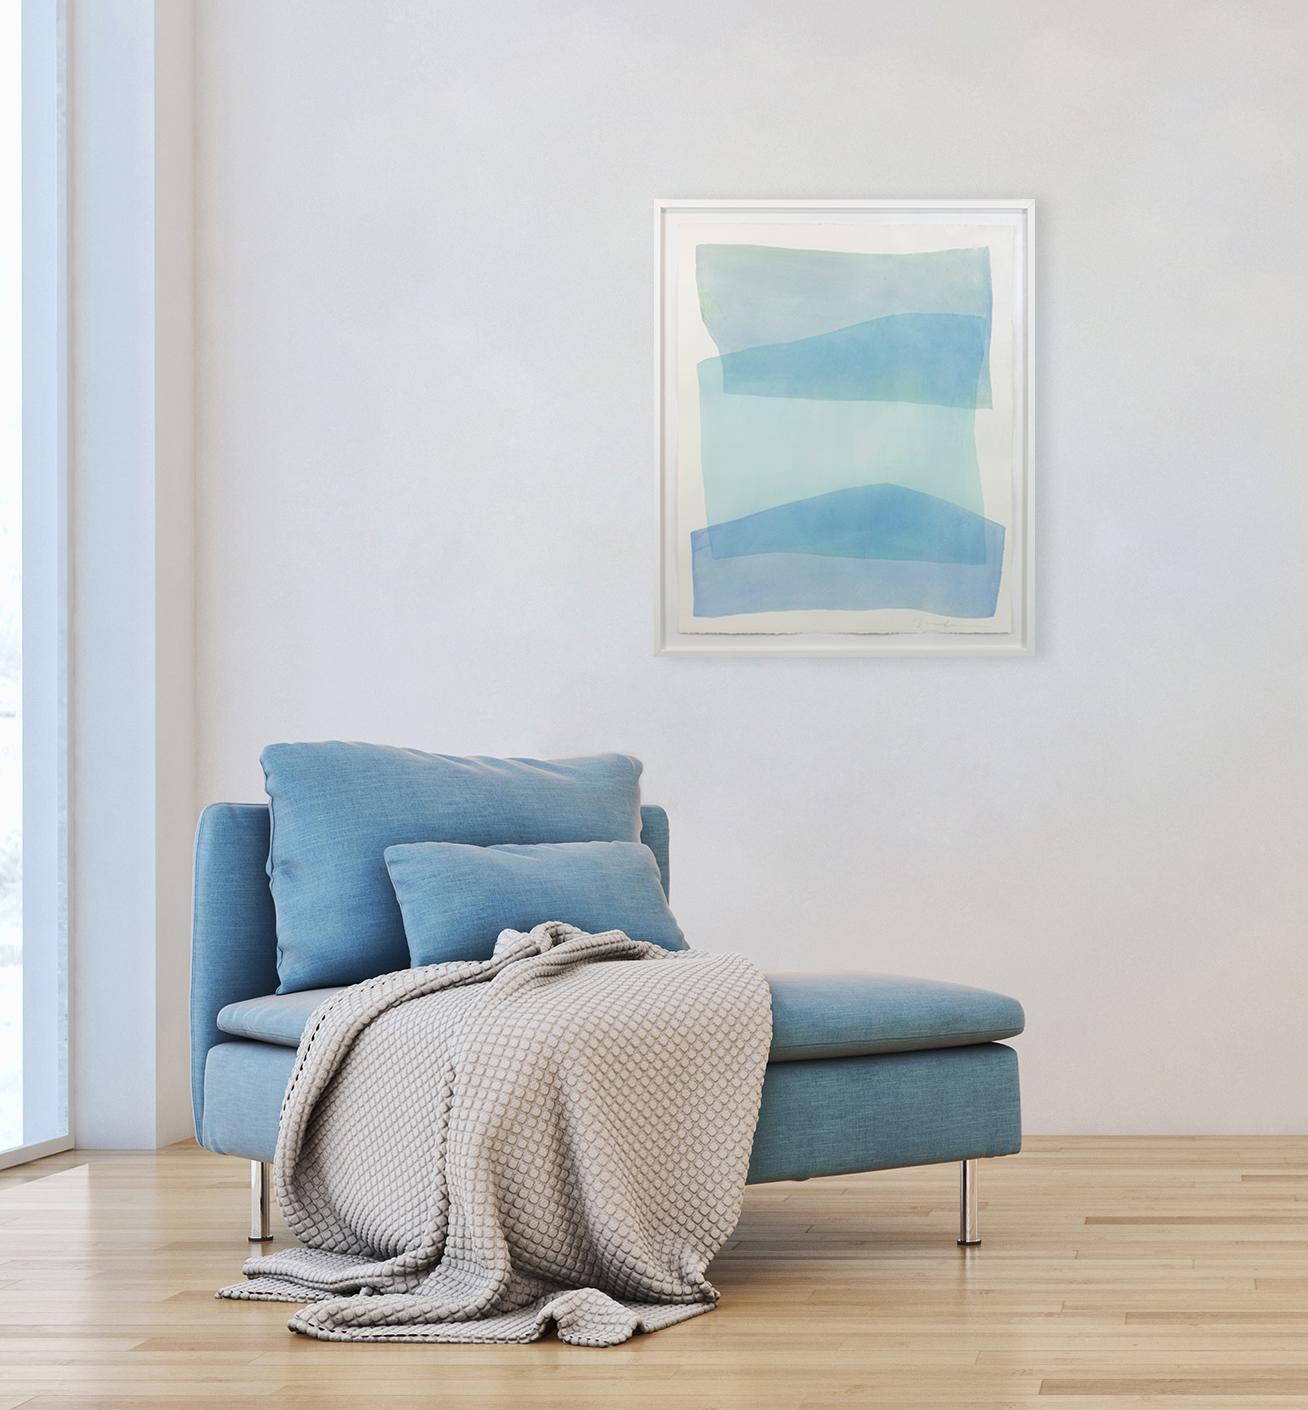 This original abstract watercolor painting by Nealy Hauschildt features a light blue and and green palette. The artist layers organic planes of washy color over one another for a balanced abstract composition. The painting is 36